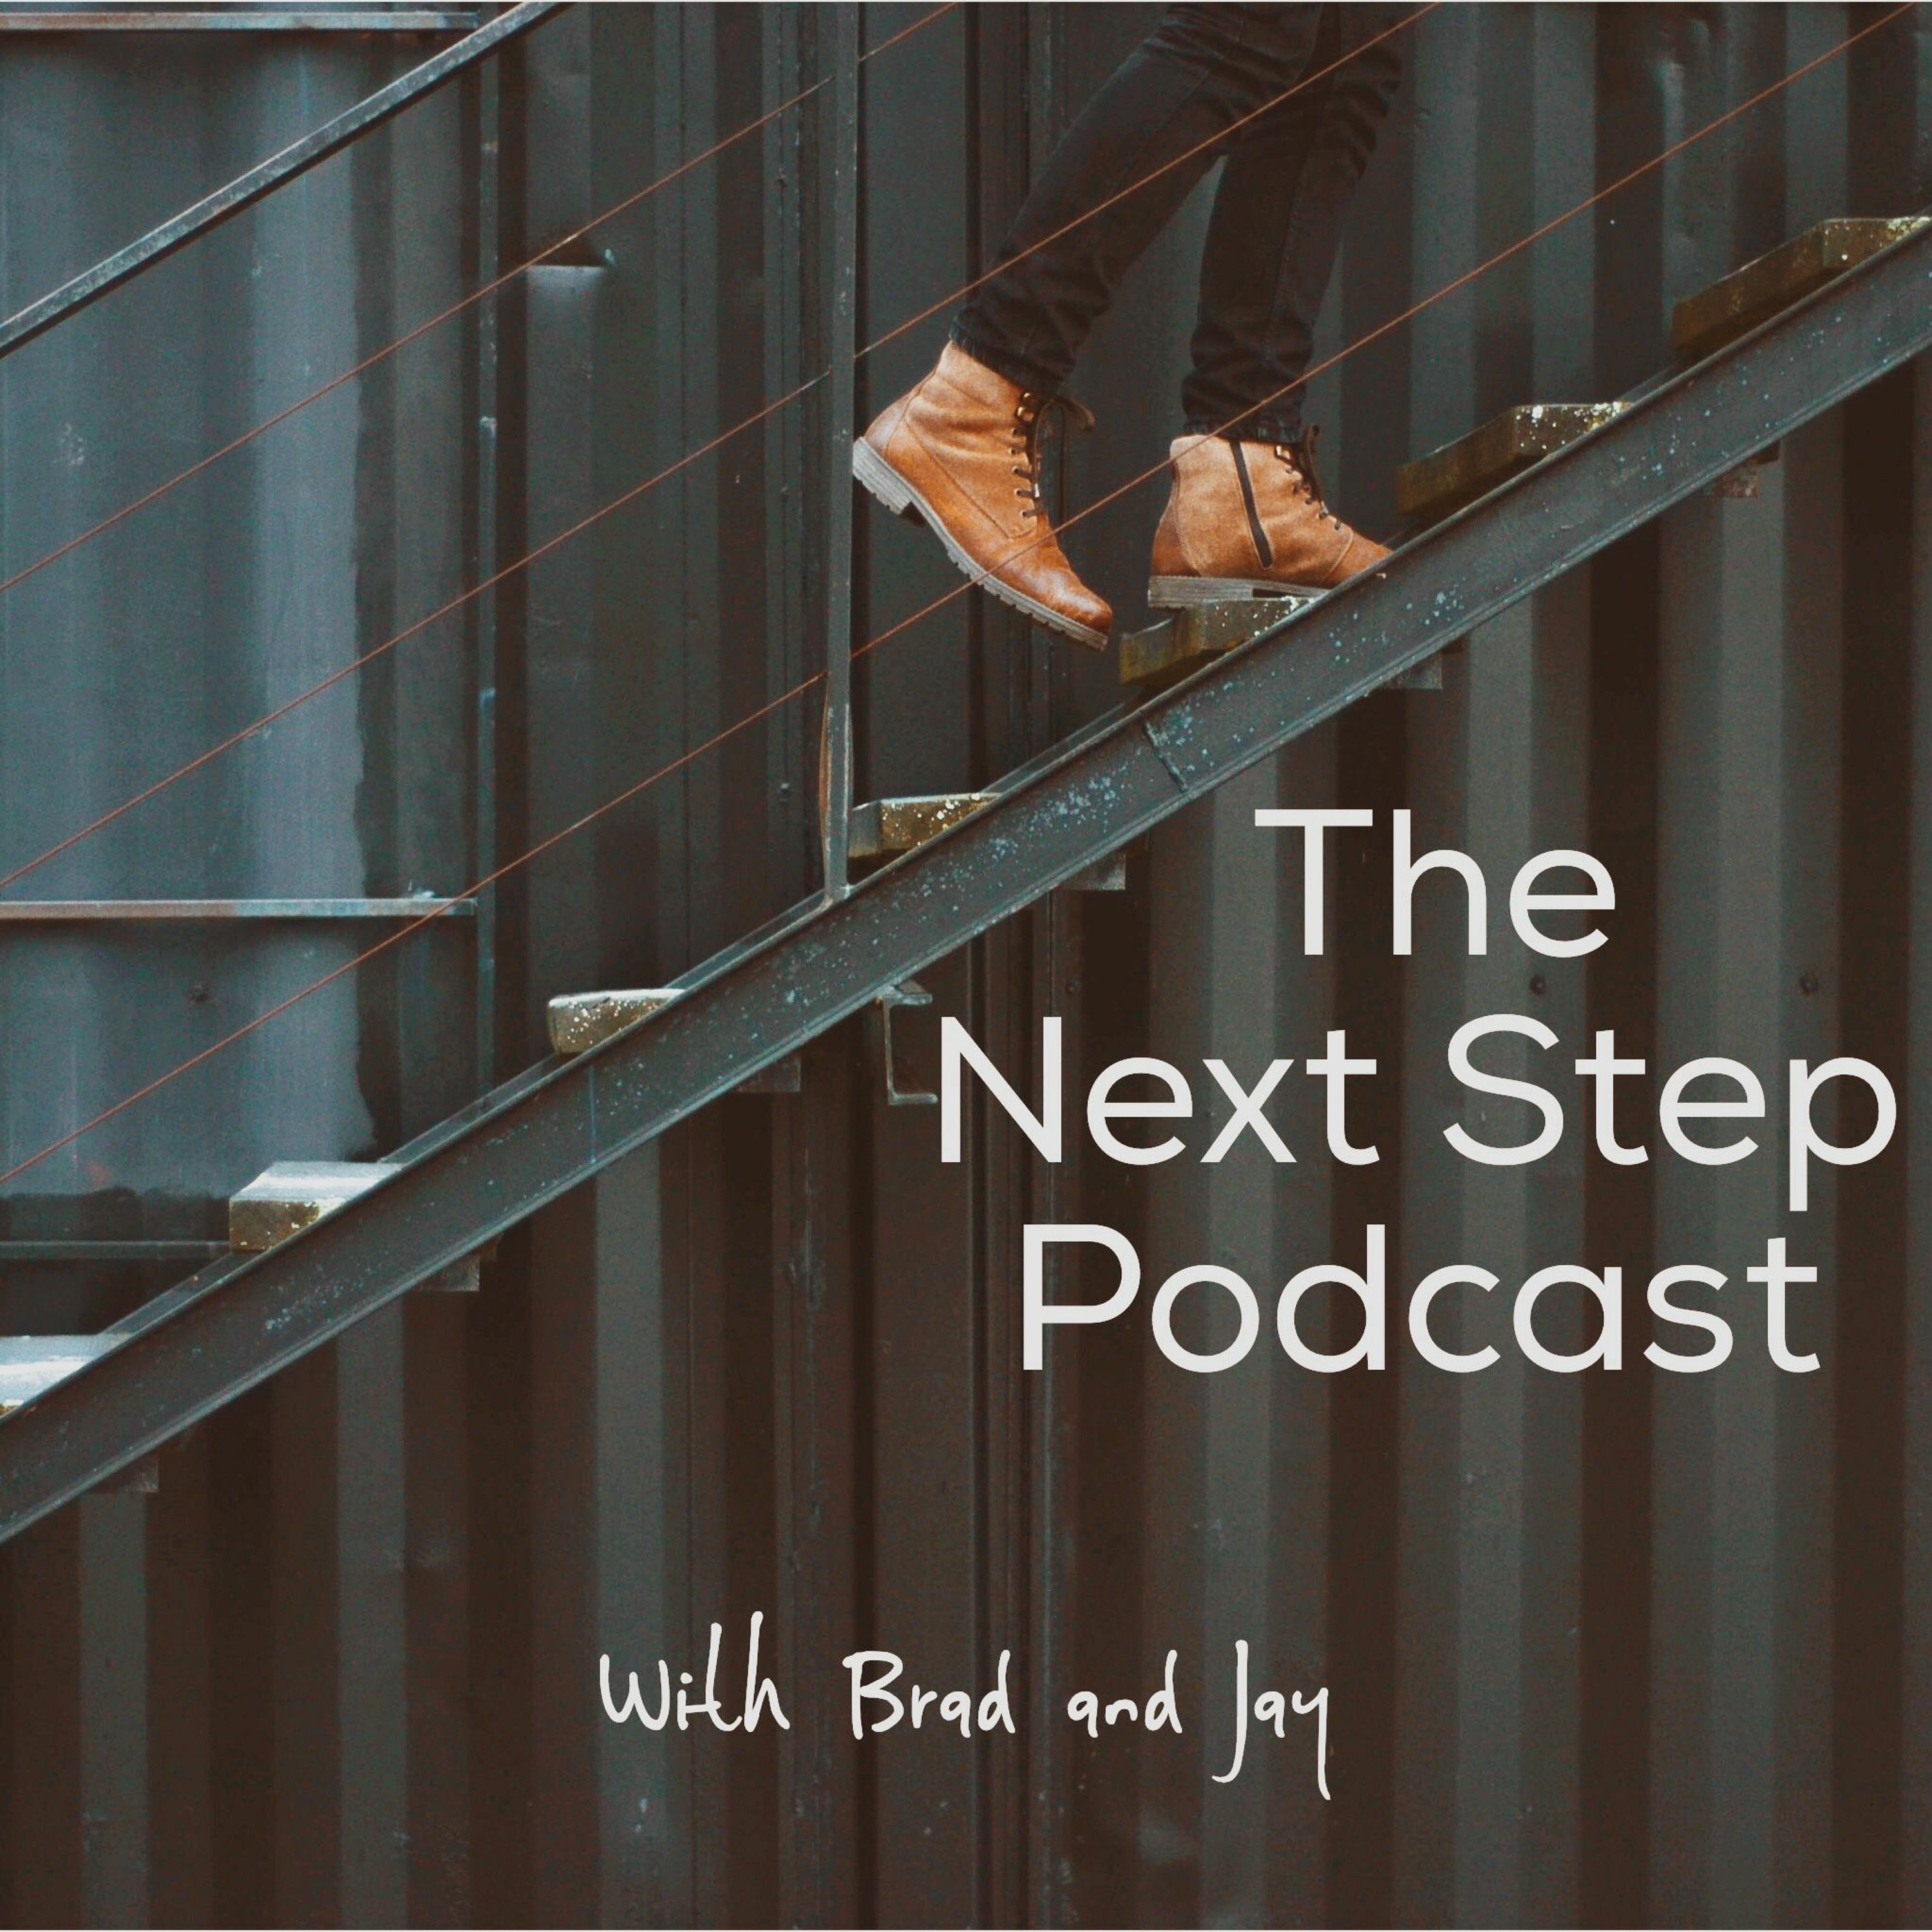 The next step pod 5.6 ---> wife or Ryan (podcast 5.5)